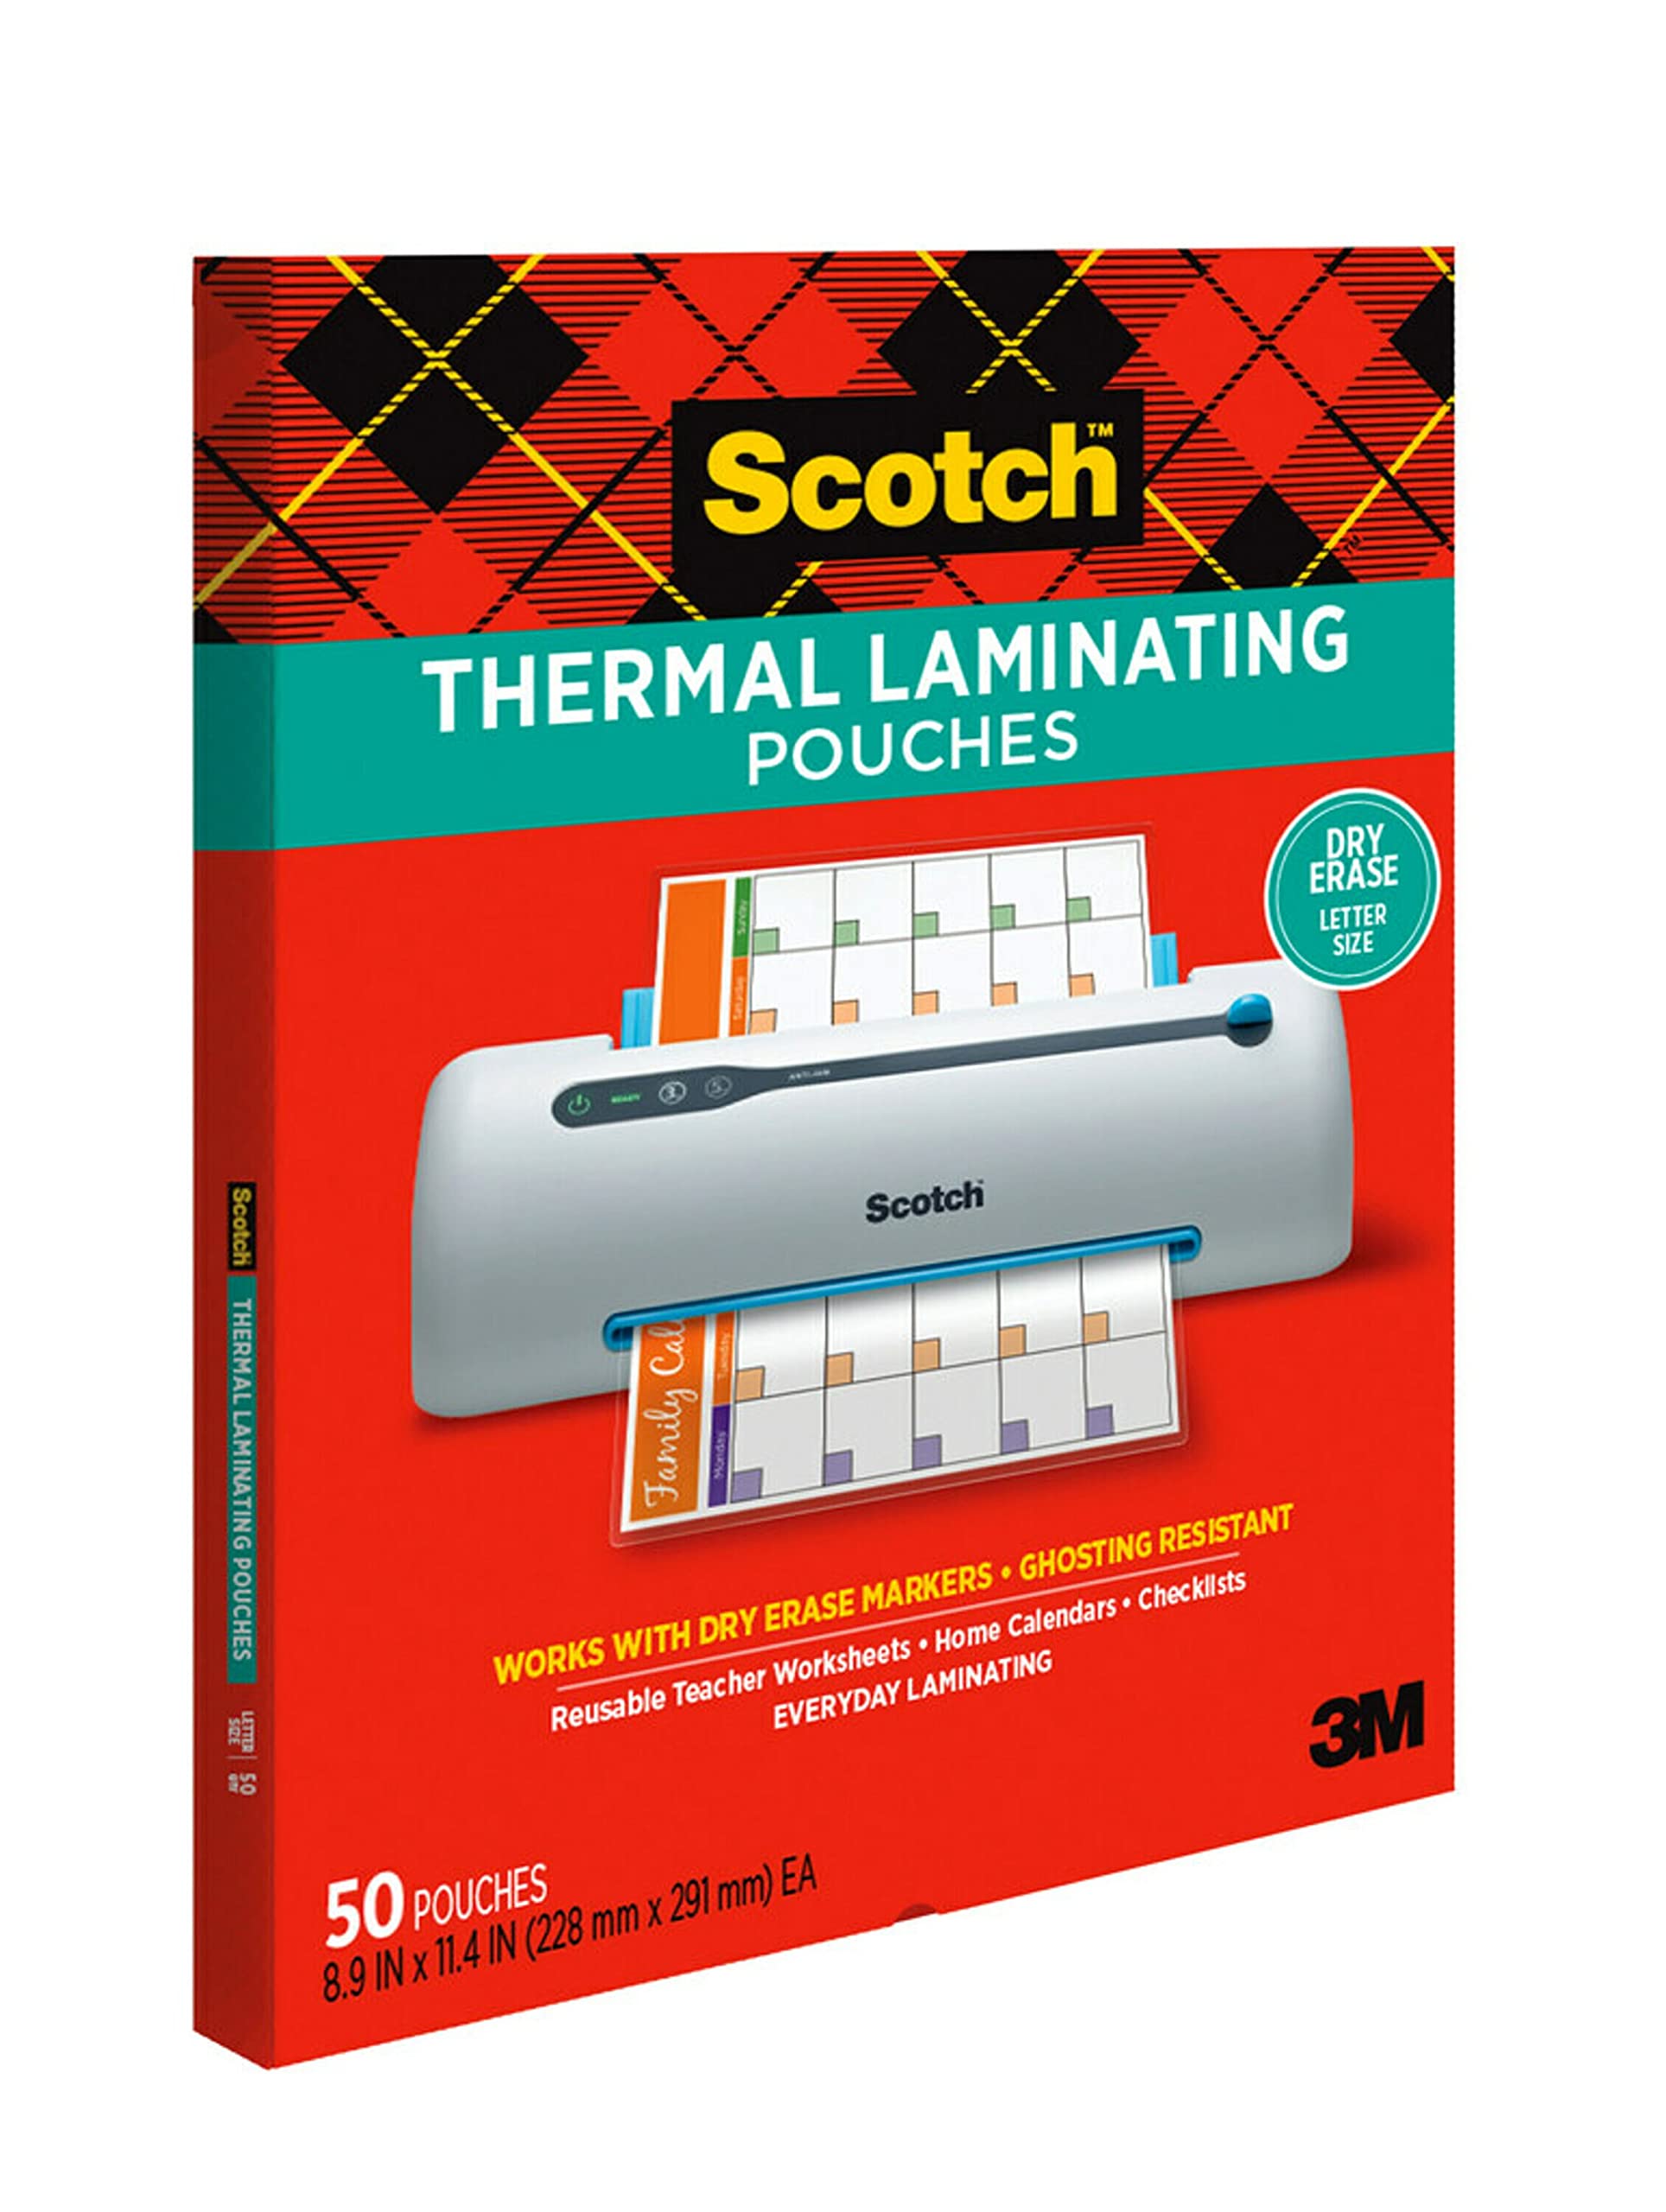 Scotch Dry Erase Thermal Laminating Pouches, 50-Pack, Works with Dry Erase Markers, Reuseable Worksheets, Calendars, Checklists, 8.9 x 11.4 Inches, Letter Size, Clear Professional Finish (TP3854-50DE)